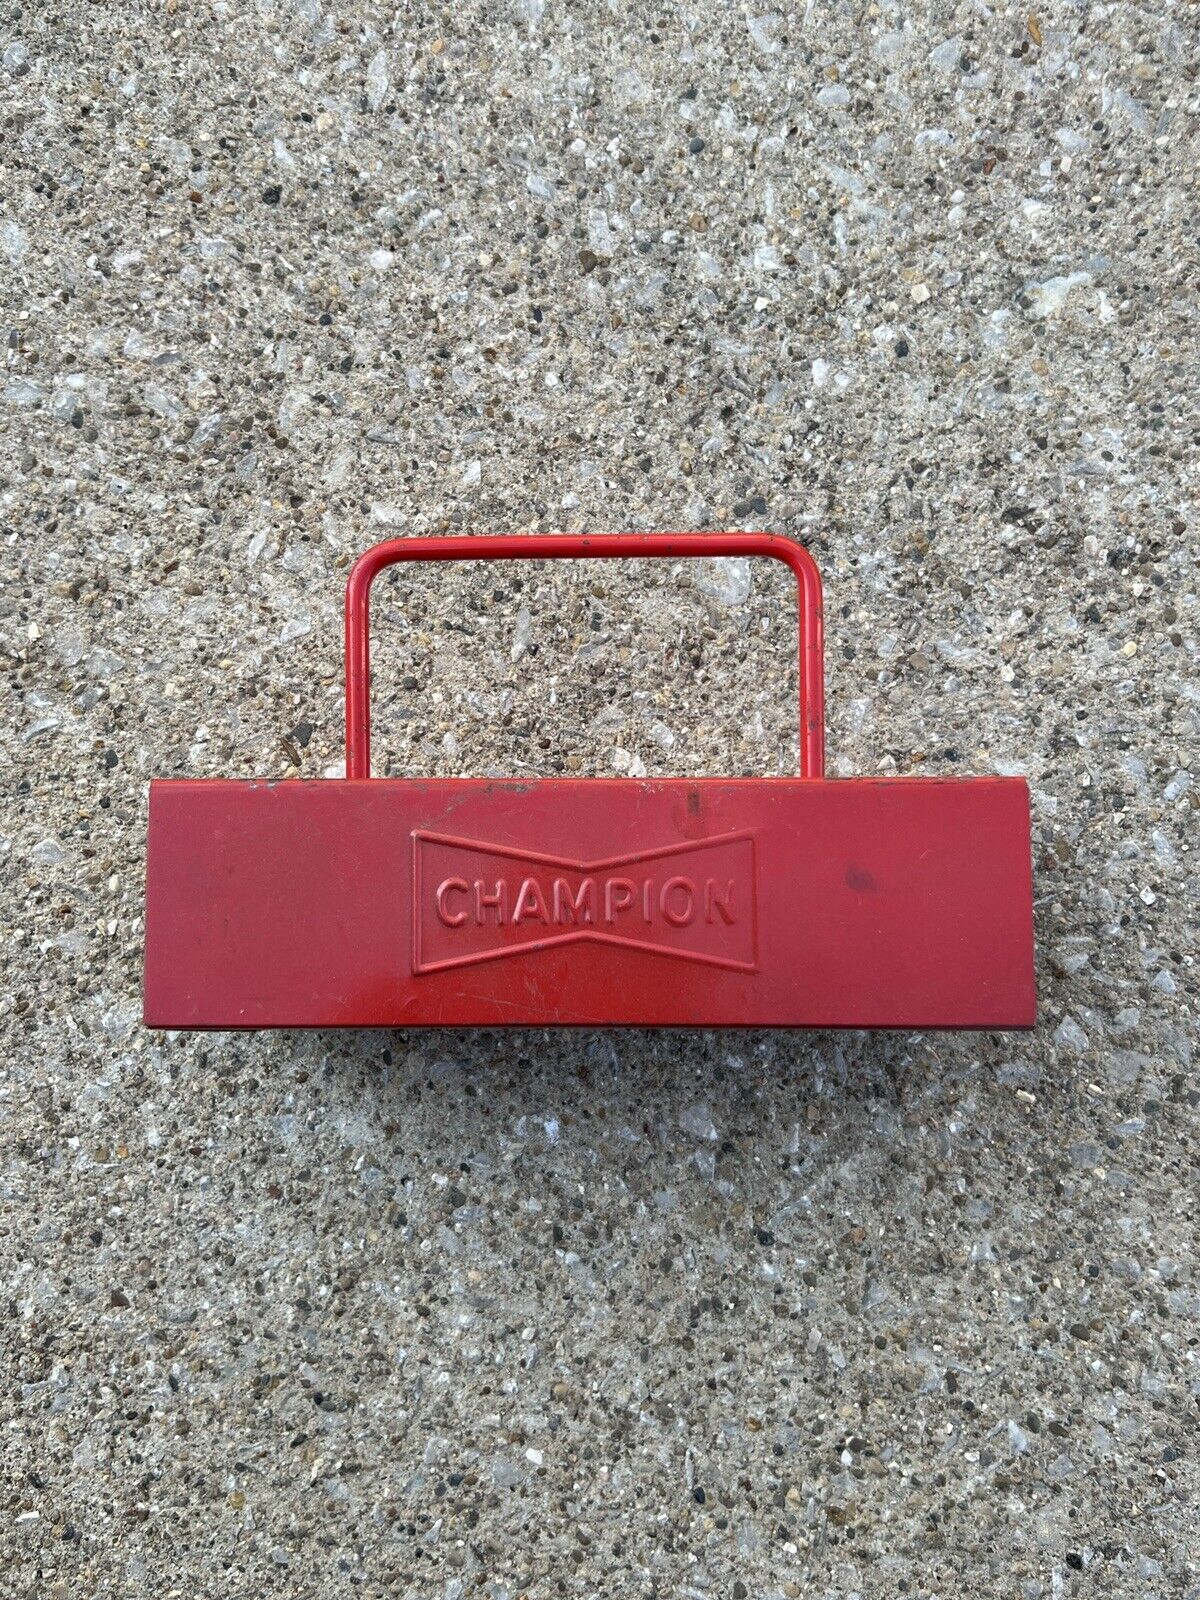 Champion CT-446 Spark Plug Tray, Vtg Red Metal, Embossed, Made in USA